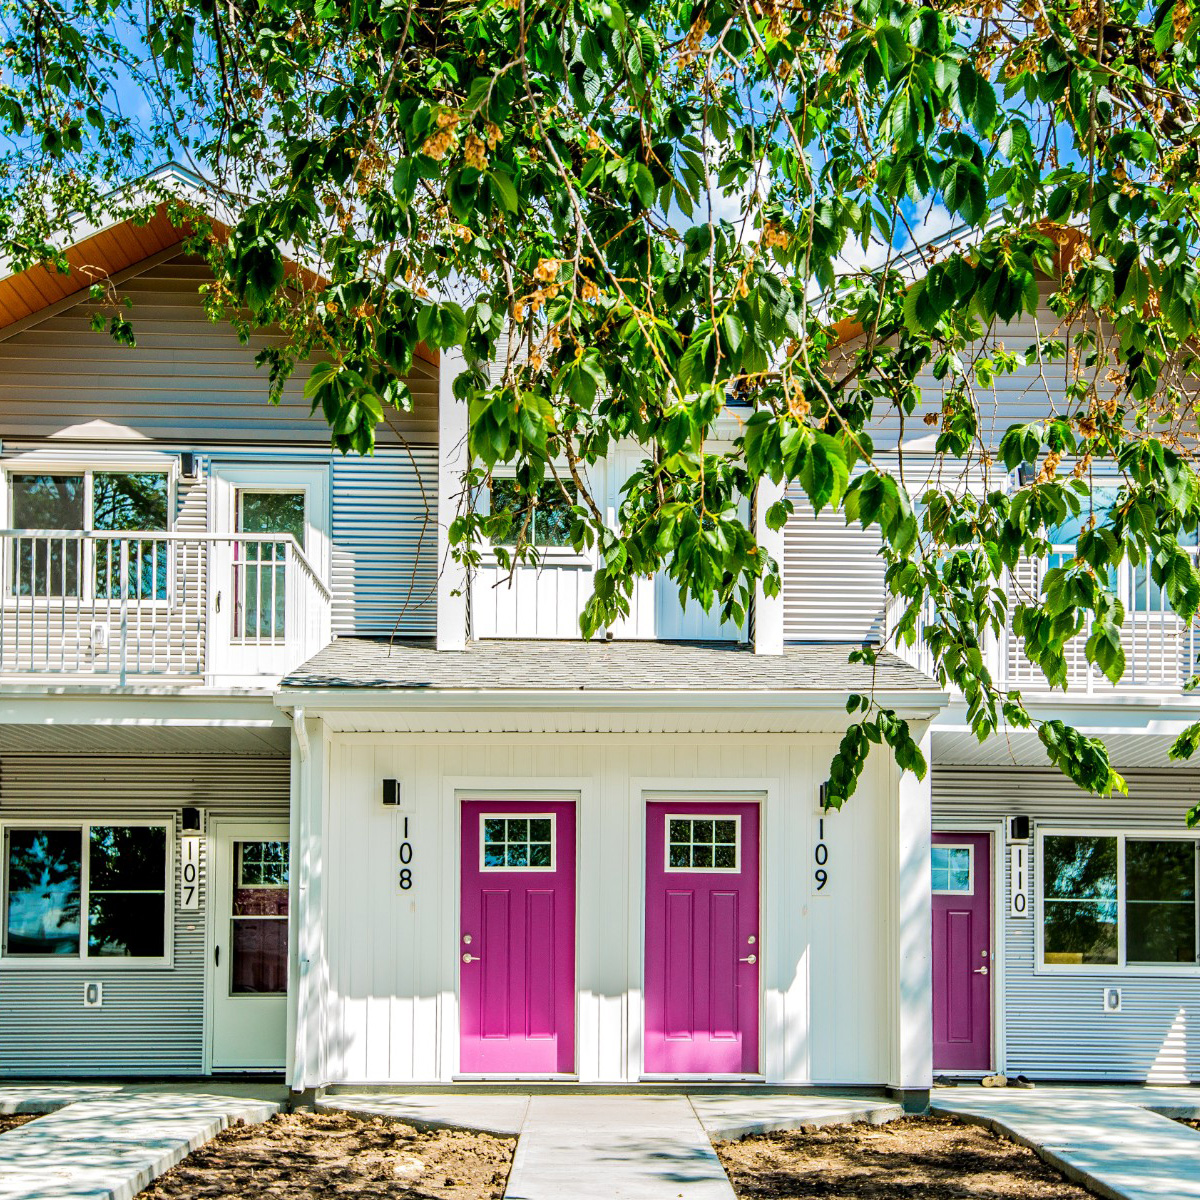 A duplex with two hot pink doors behind multiple tree branches with green leaves.